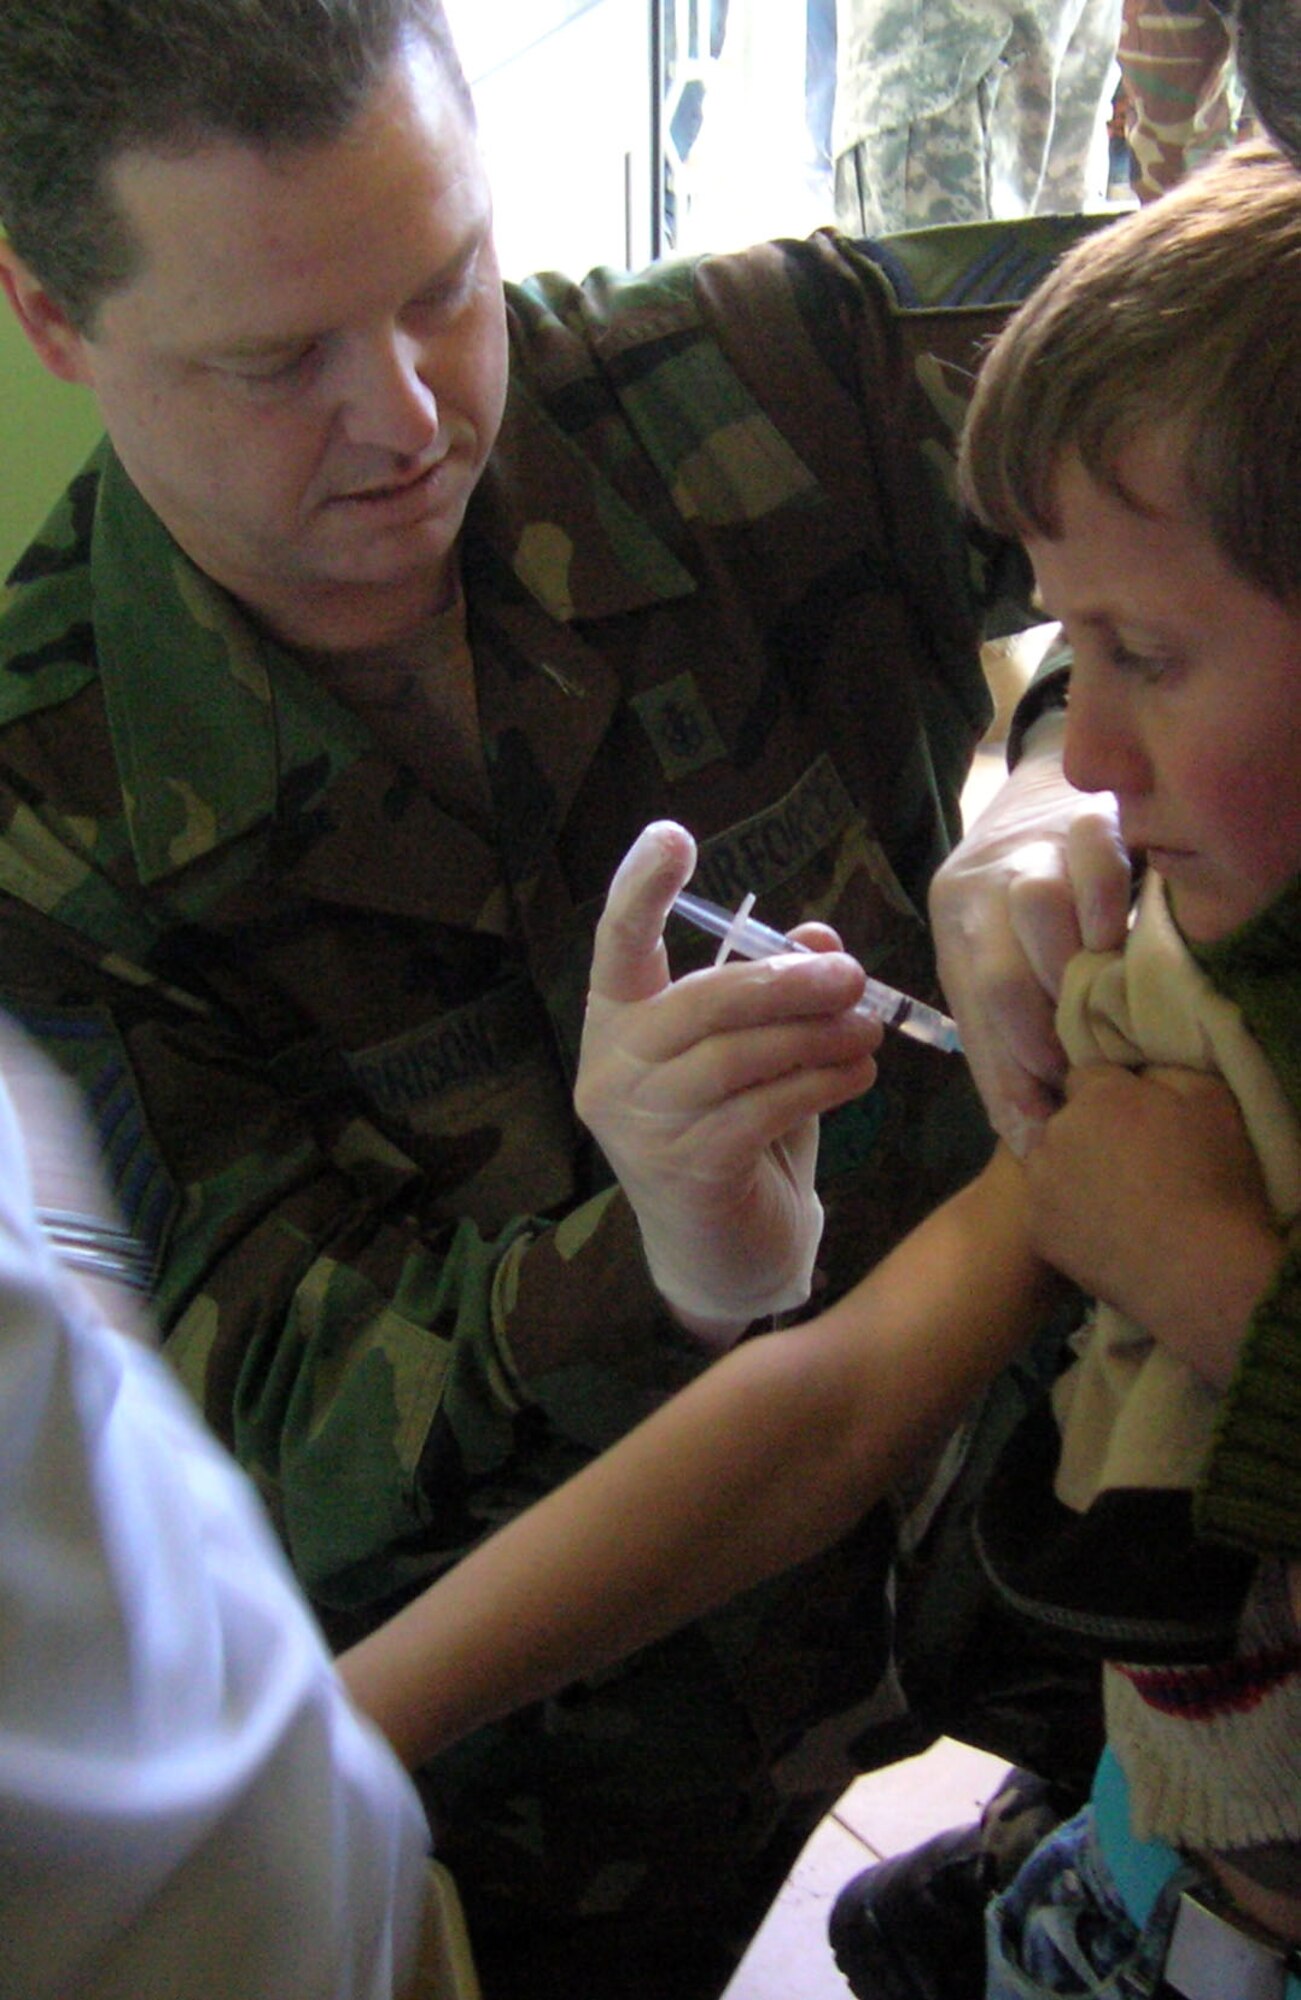 Master Sgt. David Morrison administers the Hepatitis A shot to an Albanian boy in February in Albania. Sergeant Morrison, along with four other 109th Airlift Wing medics from the Stratton Air National Guard Base in New York, administered 1,000 Hepatitis A shots during a humanitarian mission with the New Jersey National Guard. (Courtesy photo) 
